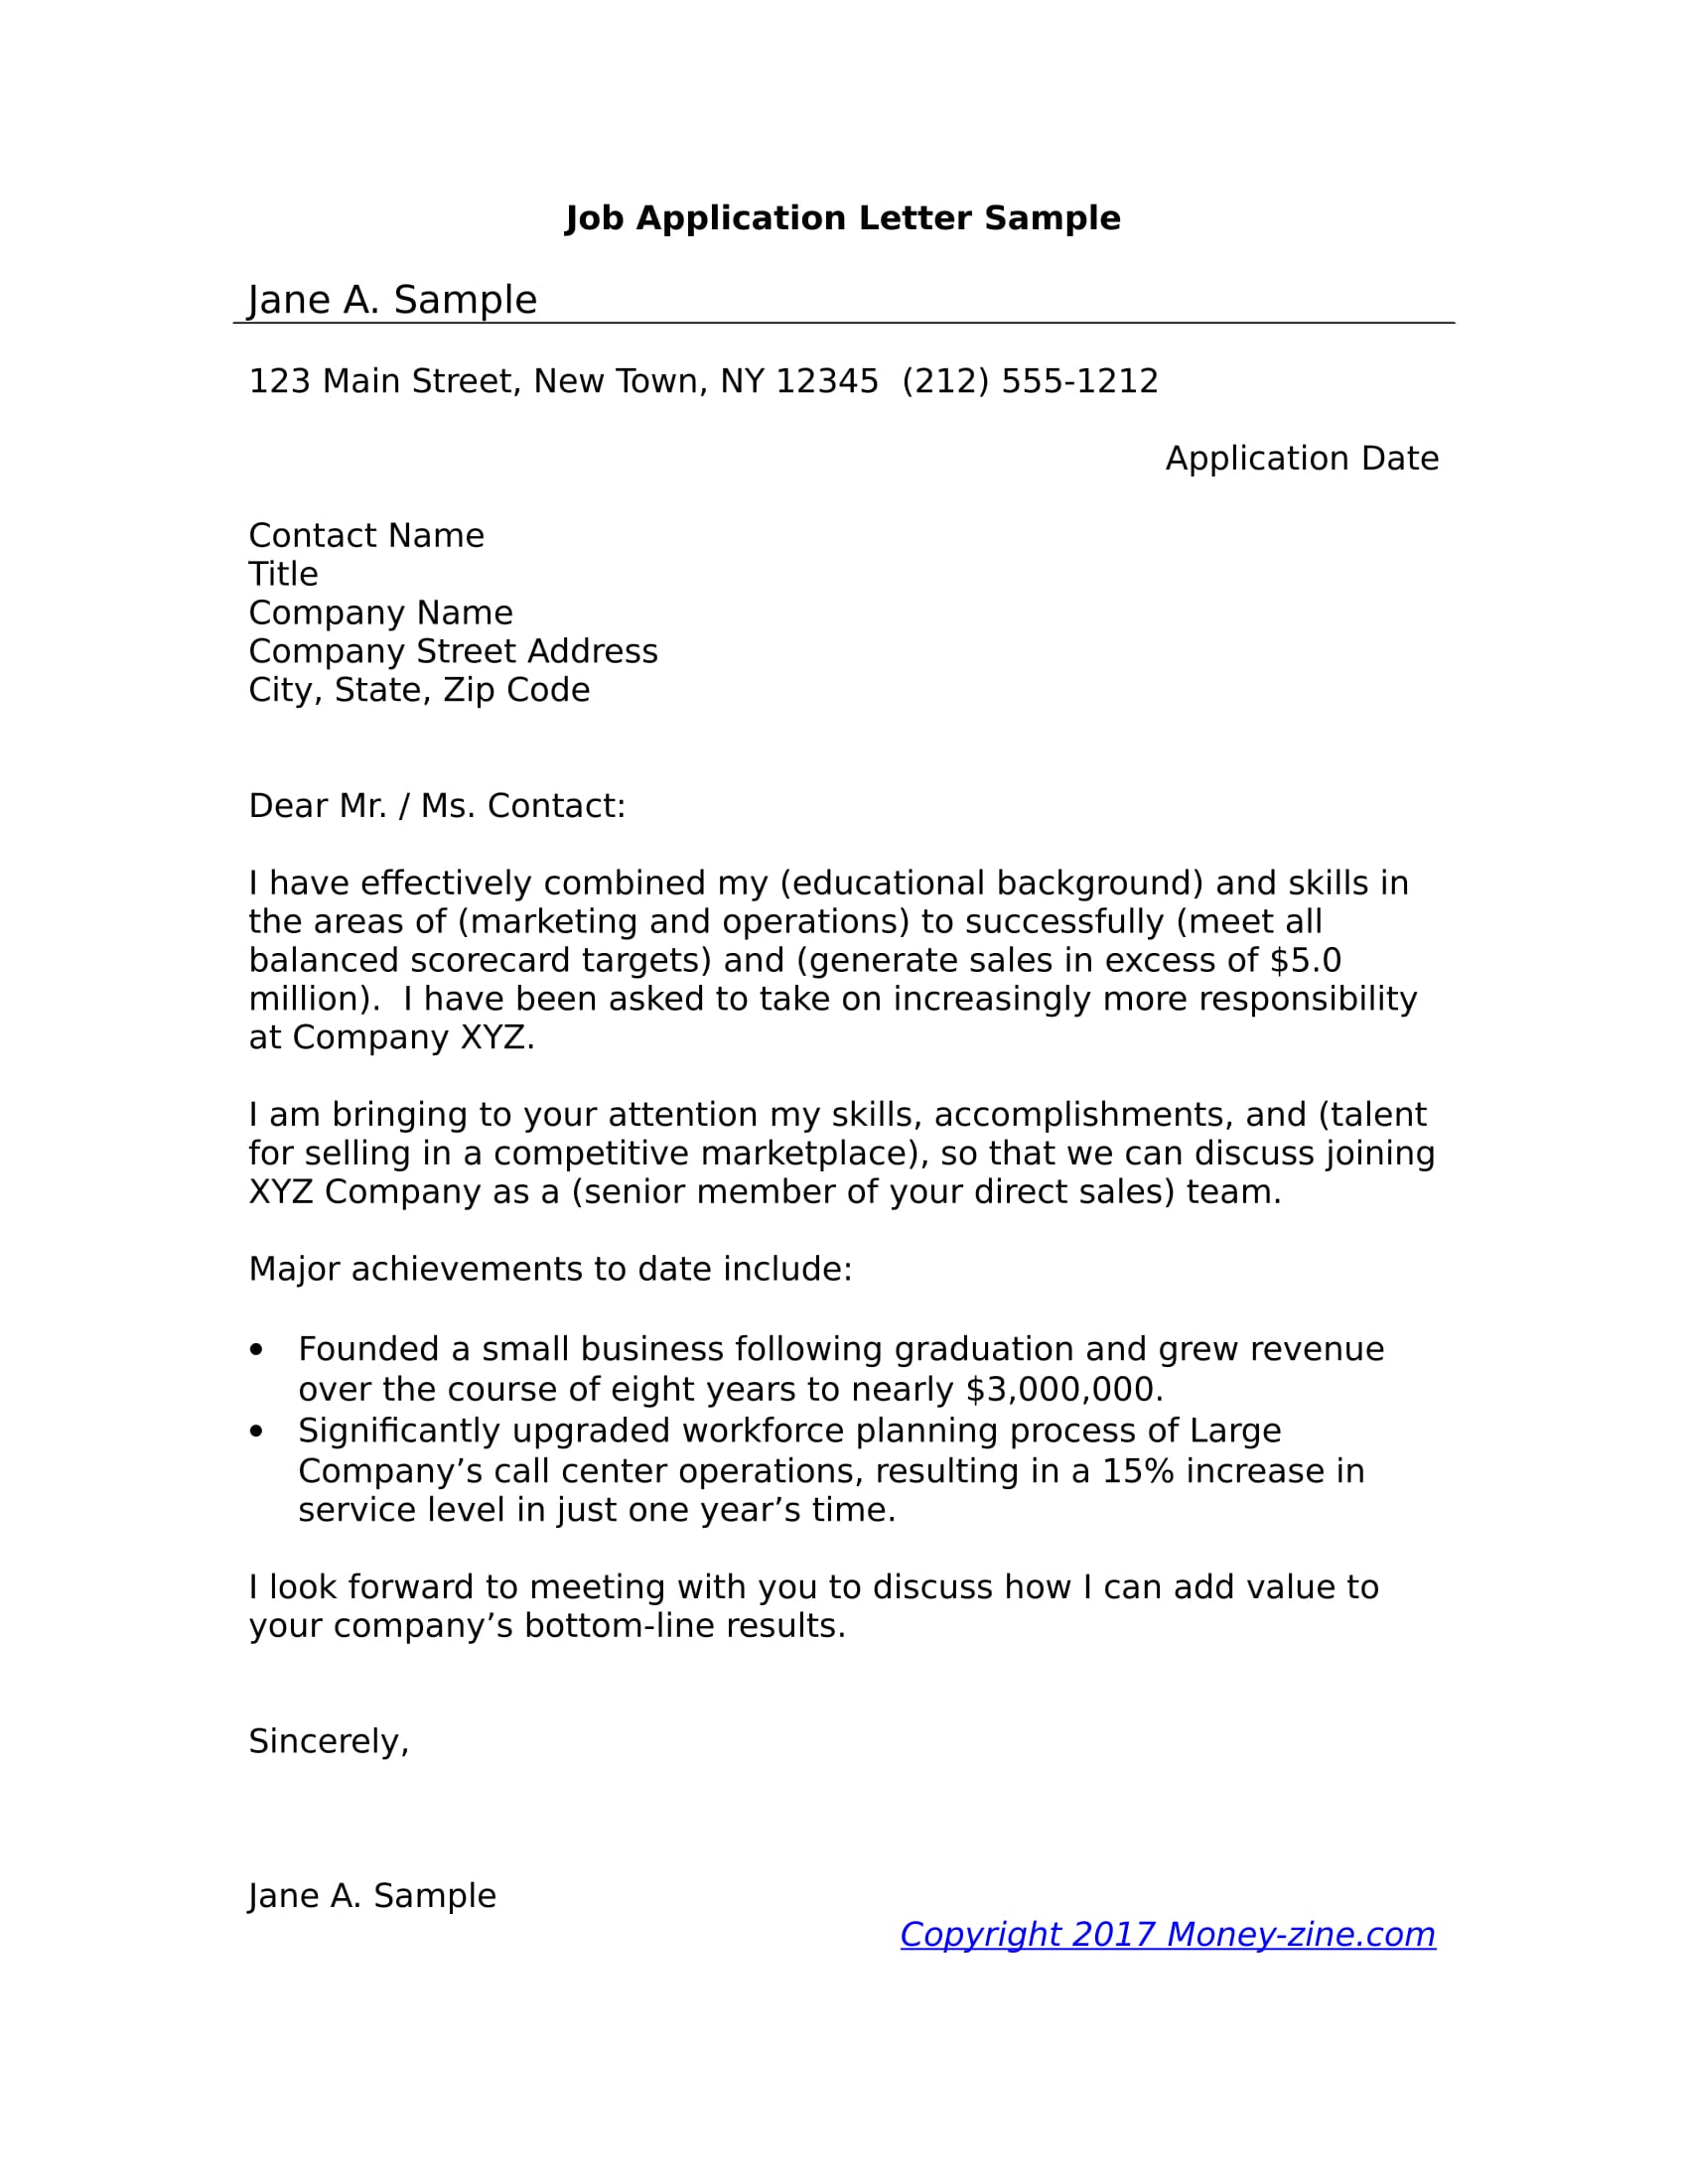 example of application letter for job